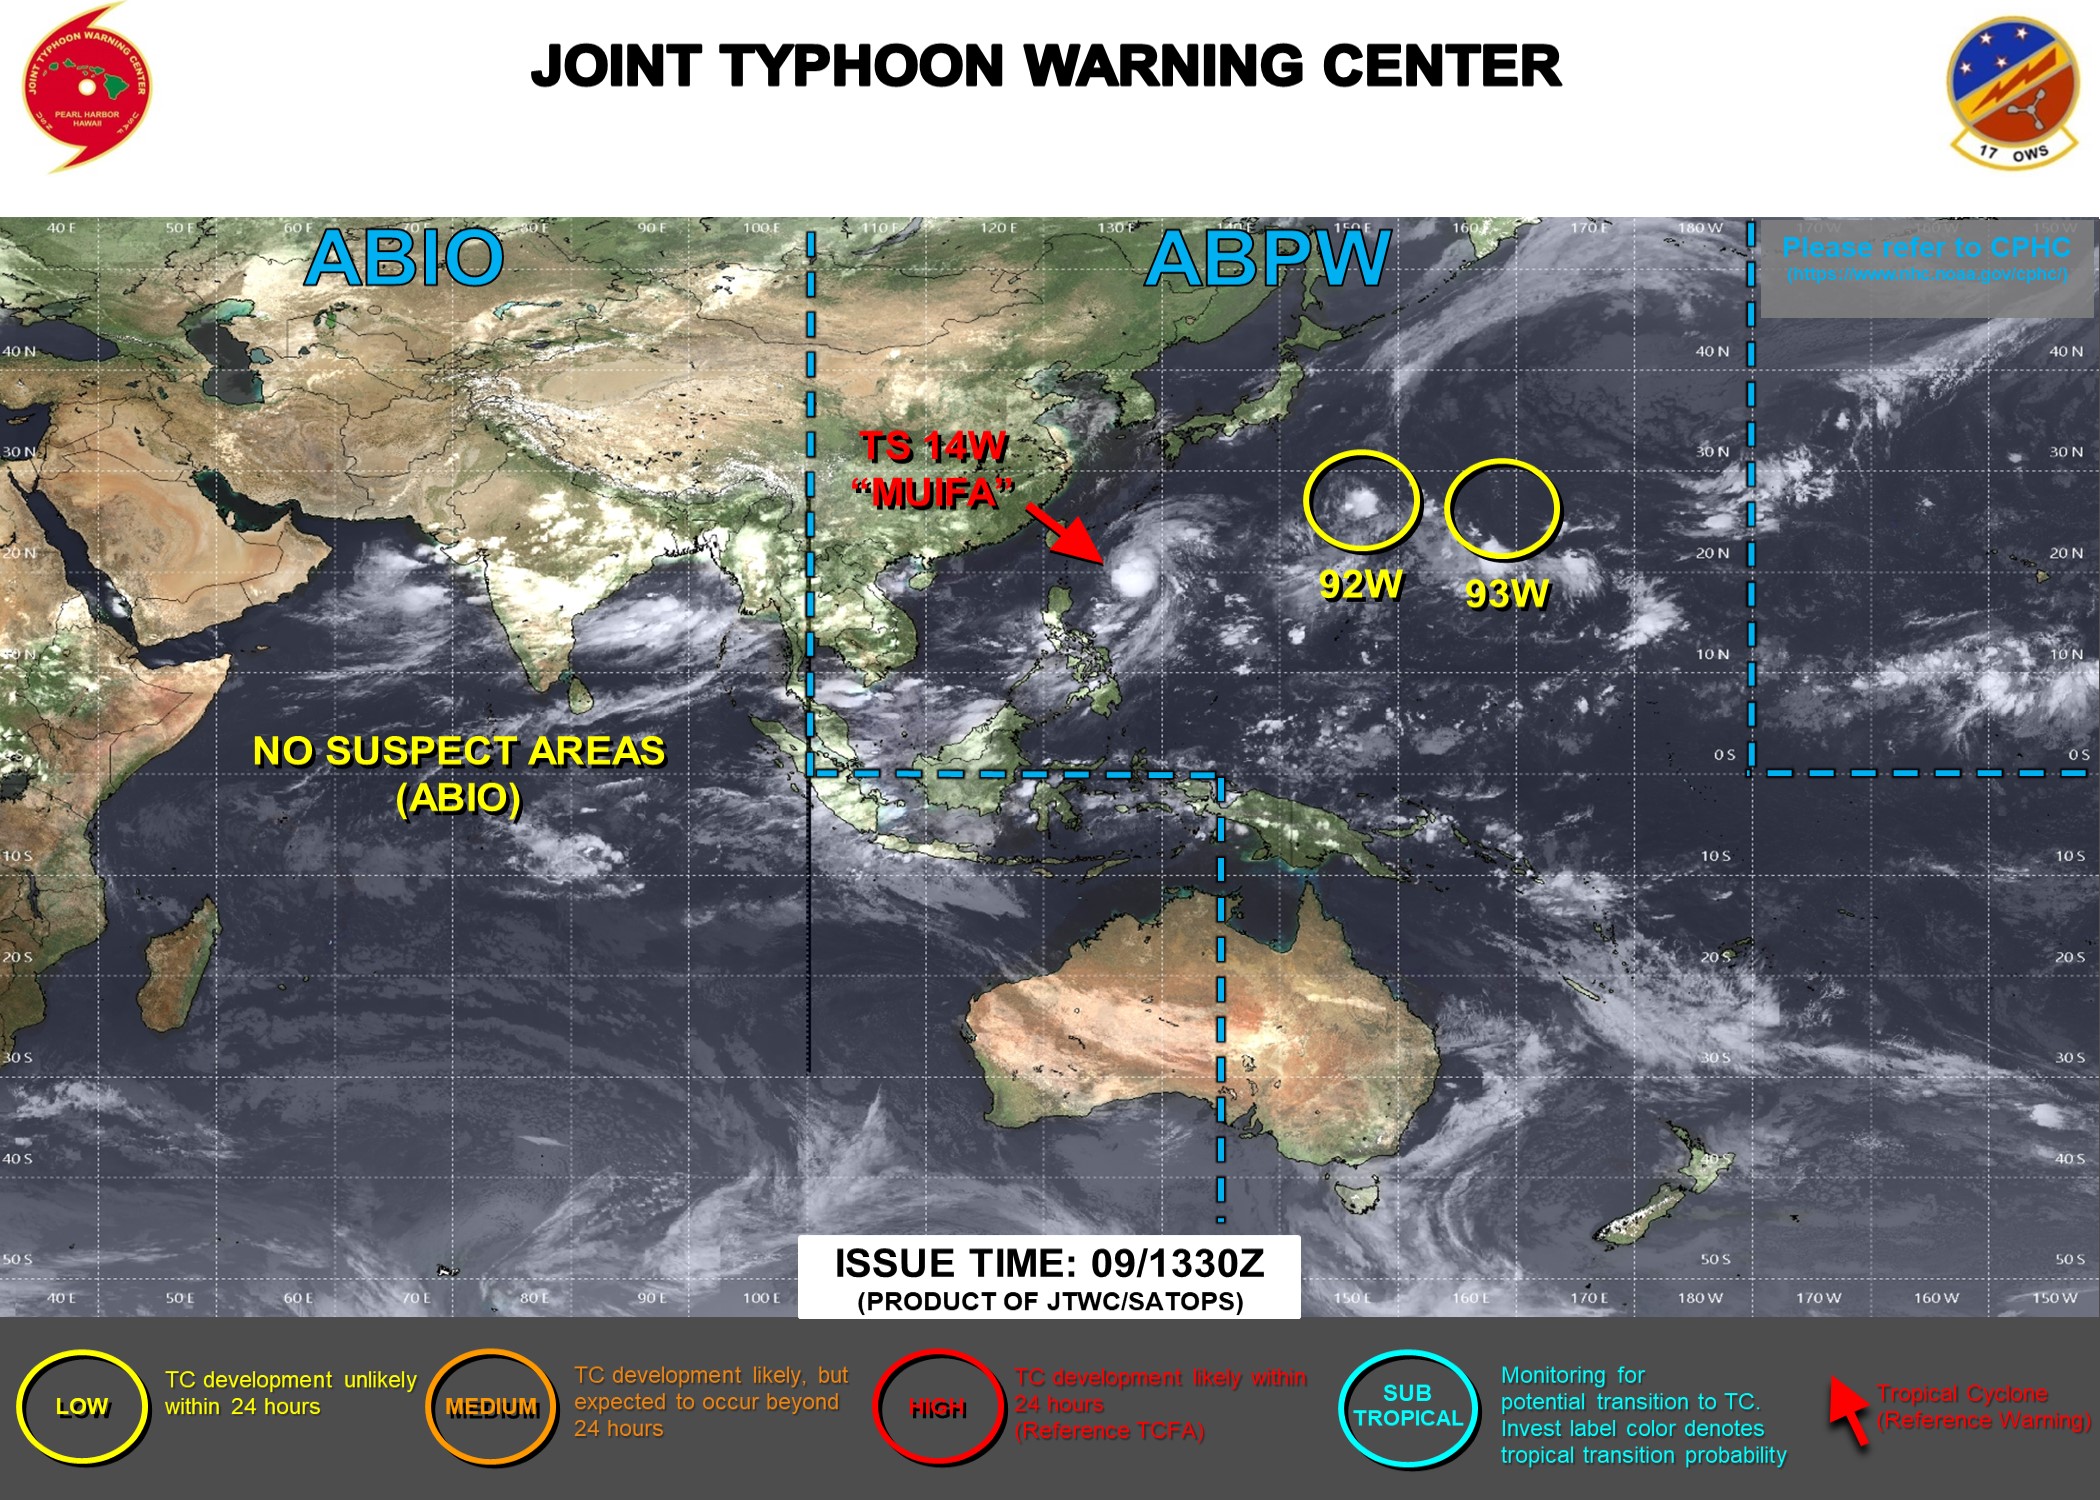 JTWC IS ISSUING 6HOURLY WARNINGS AND 3HOURLY SATELLITE BULLETINS ON 14W.